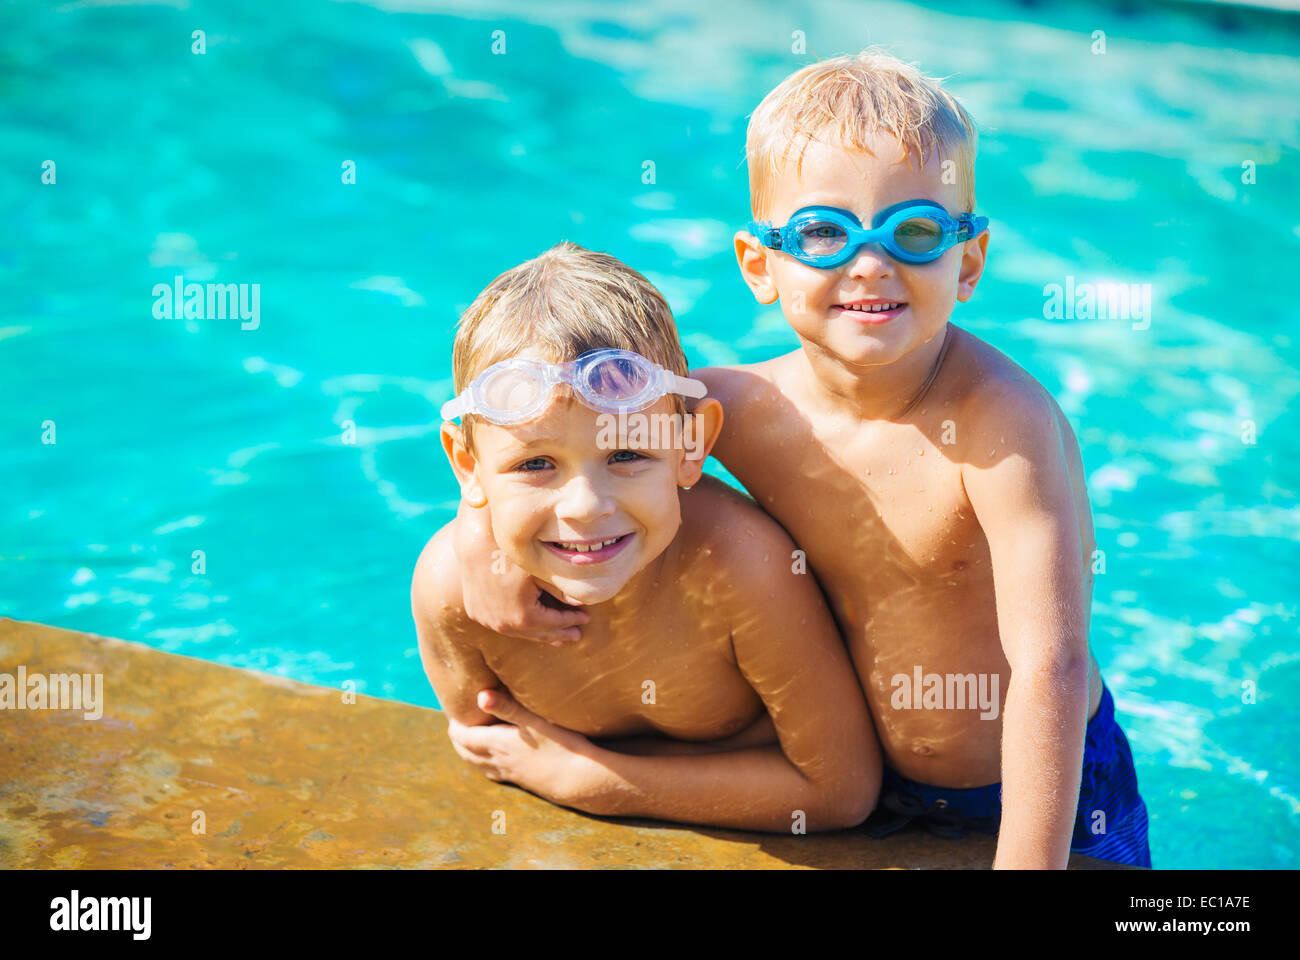 Two Adorable Young Boys Having fun at the Pool. Summer Vacation Fun. Stock Photo